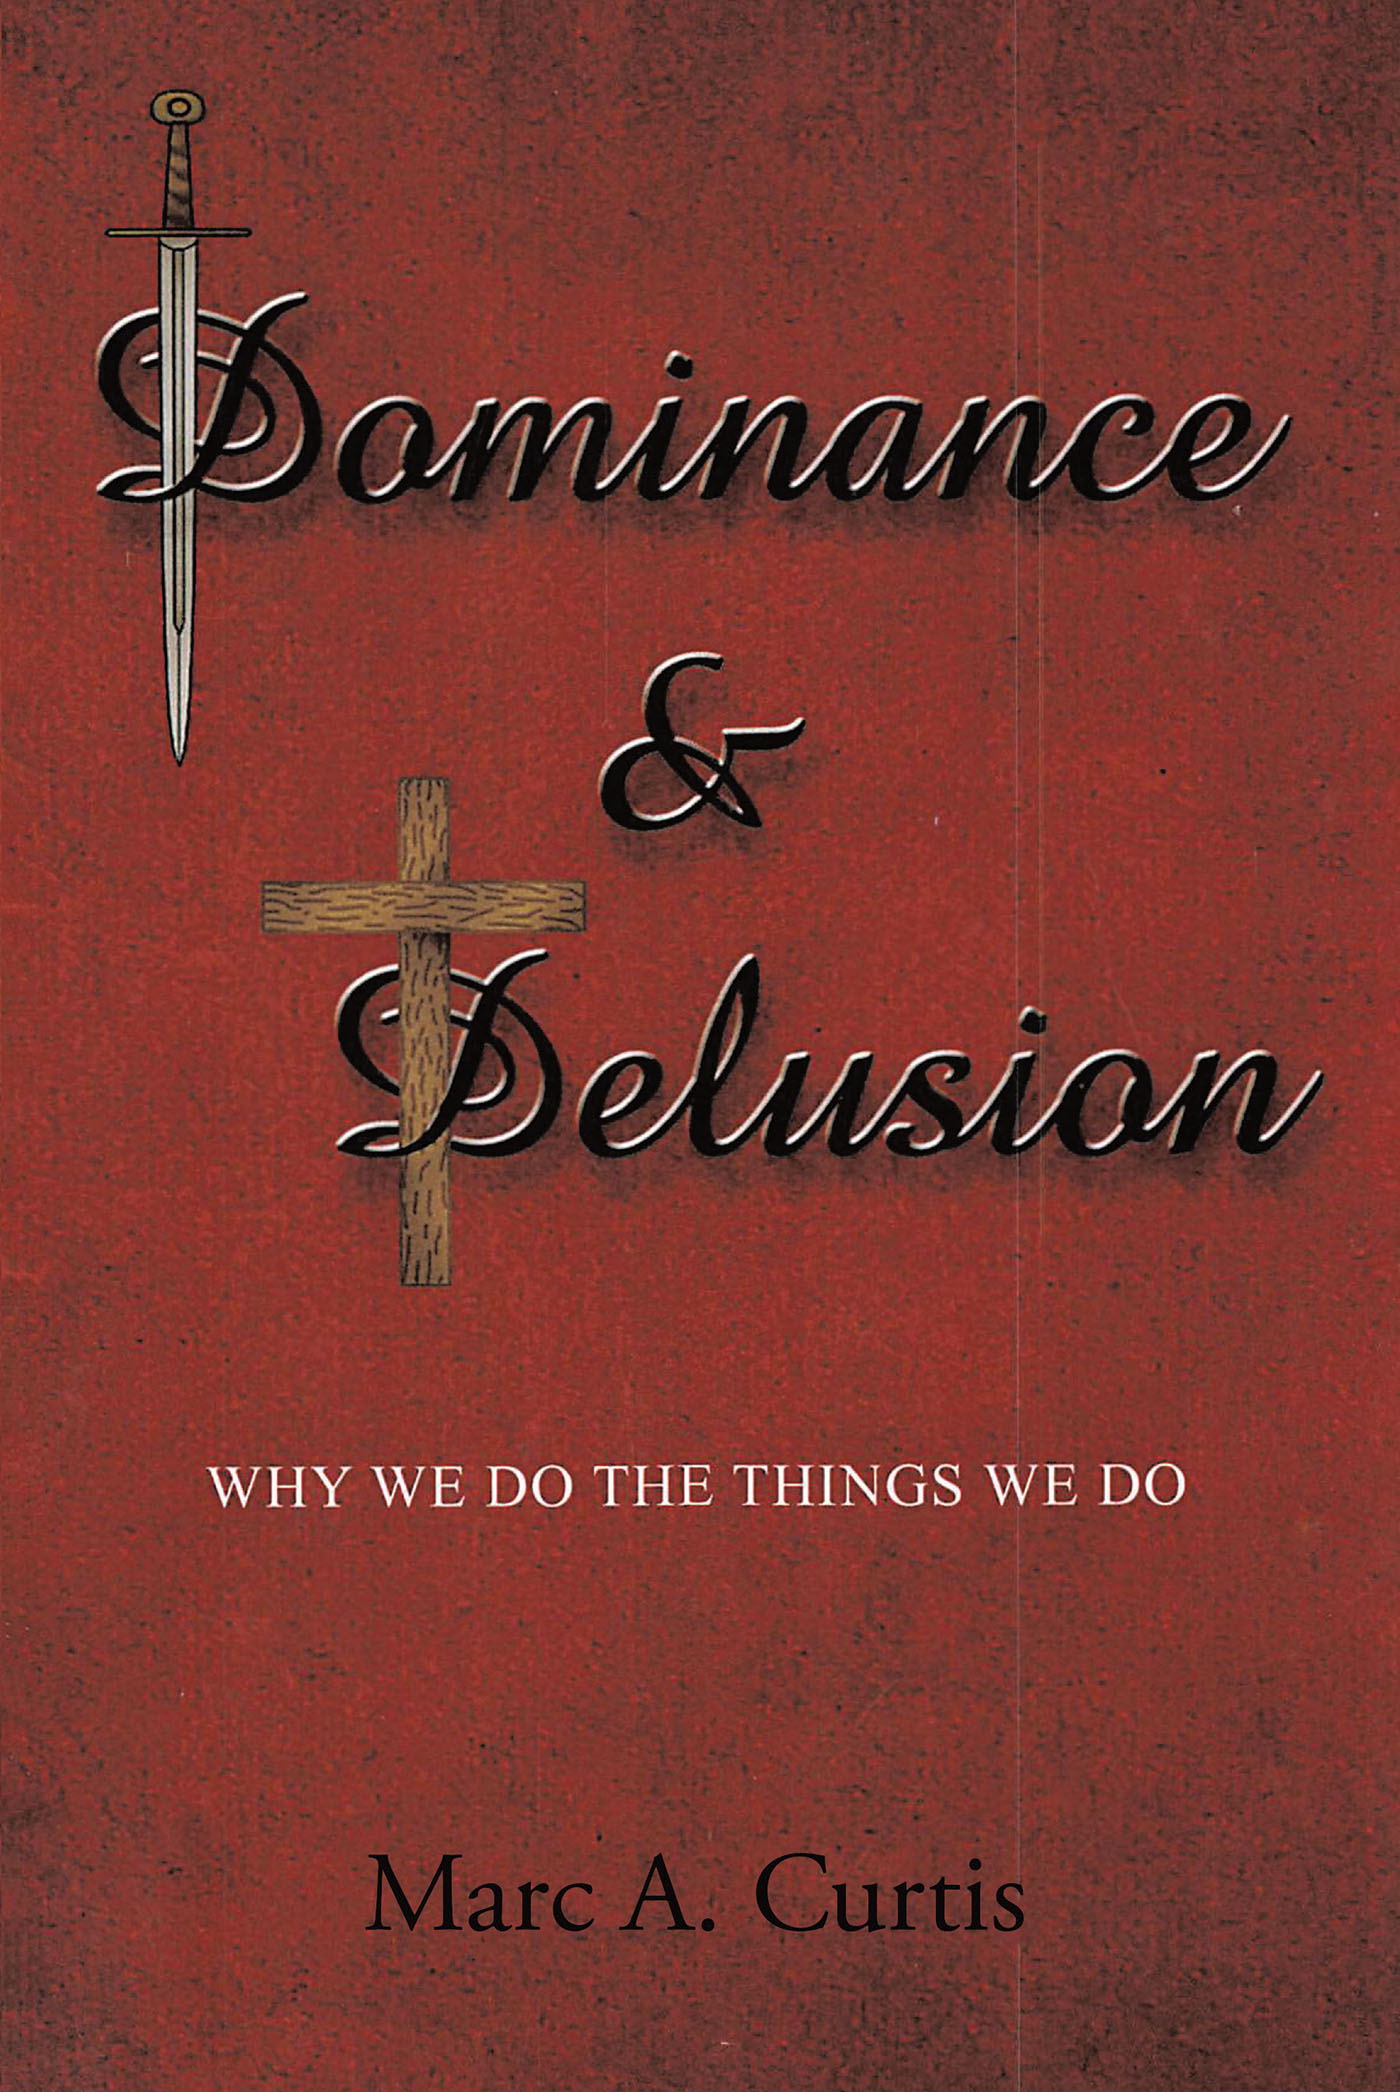 Marc A. Curtis’s New Book, "Dominance and Delusion: Why We Do The Things We Do," Explores the Important Questions of Why the World and Society Works as It Does